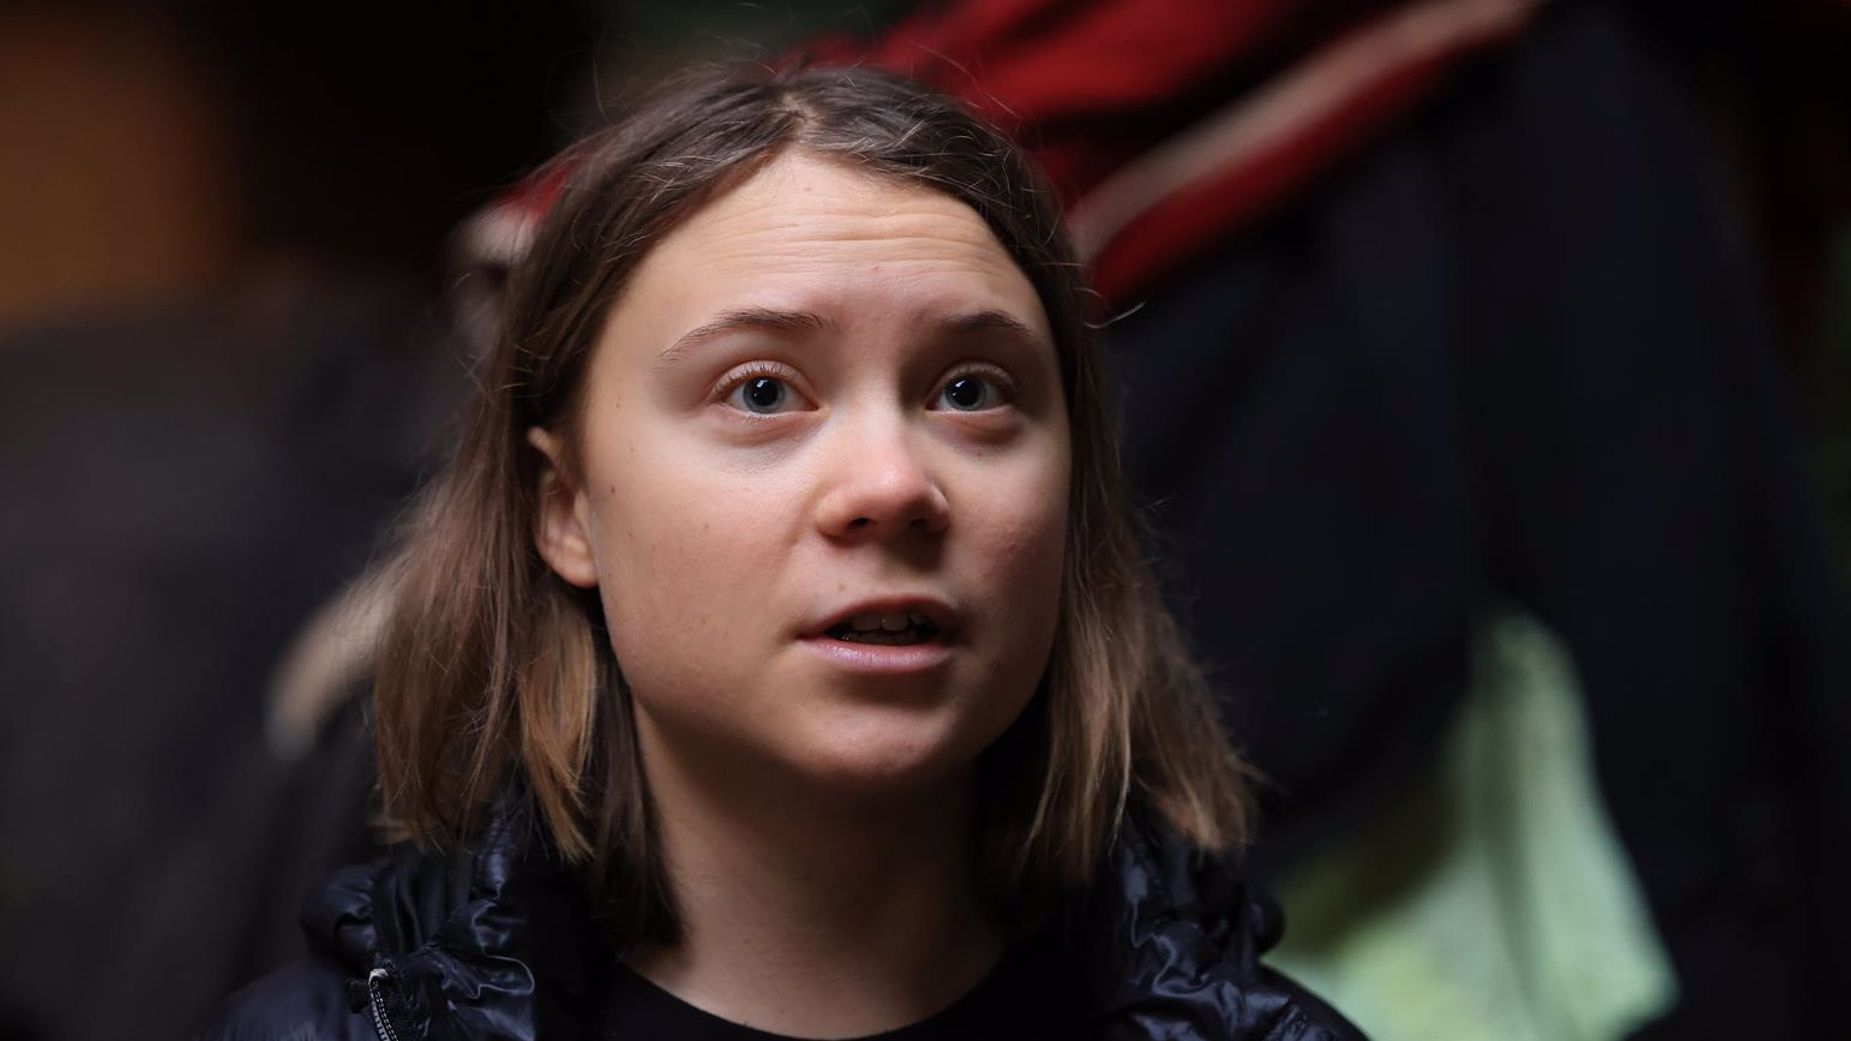 Greta Thunberg graduates and can cease taking part at school strikes for the local weather